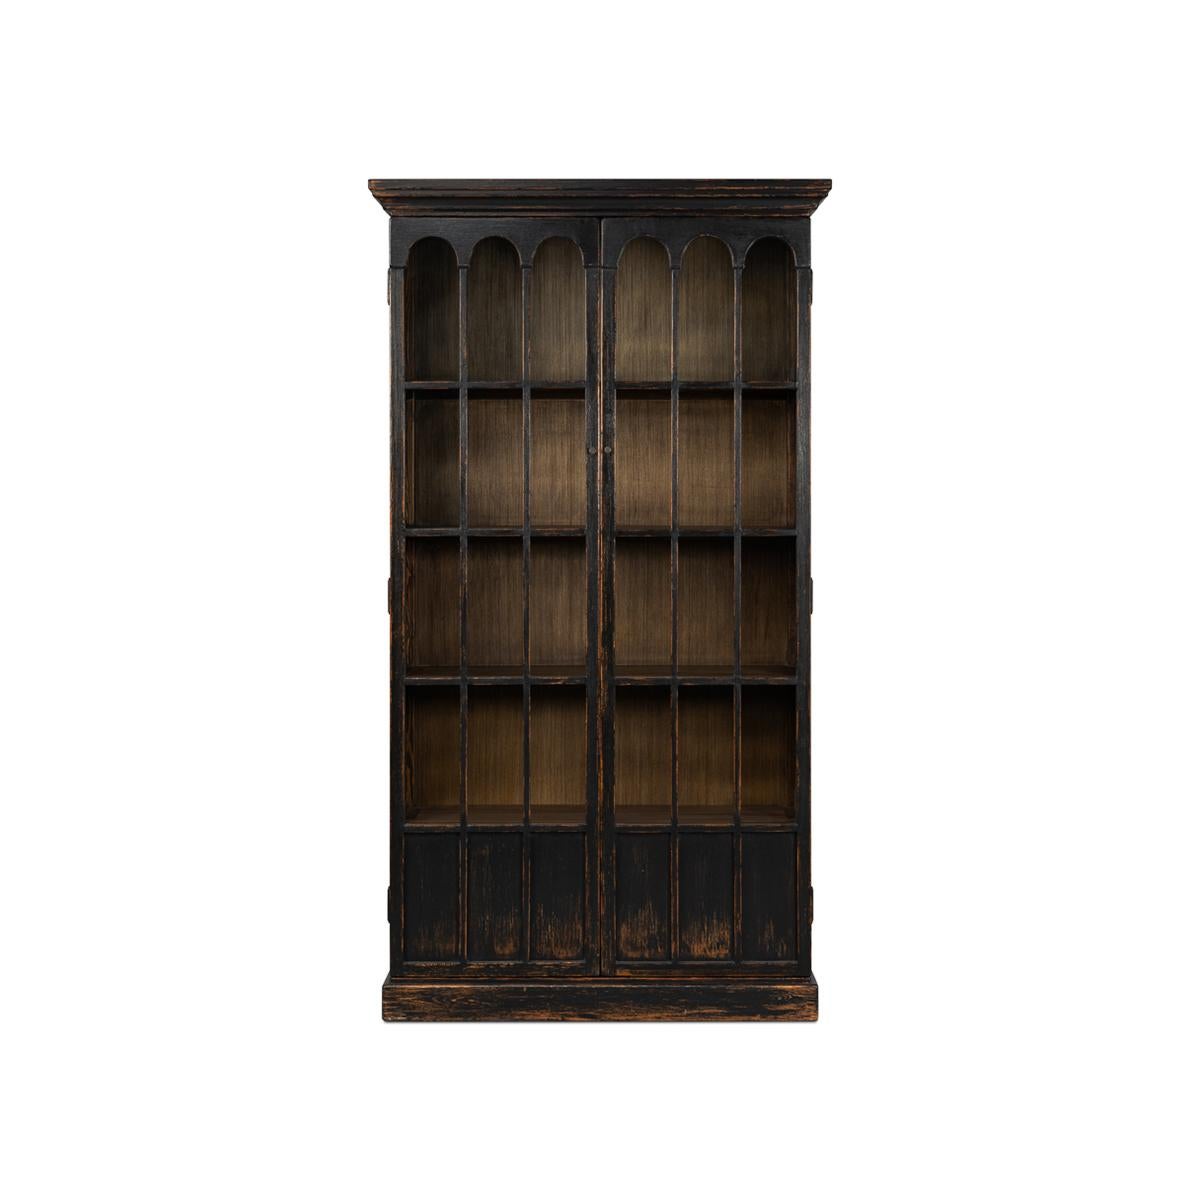 Rustic black bookcase with decorative glass doors. A beautiful and functional book or display case. This piece has two doors with Gothic era-inspired arched glass panels. This case has four adjustable shelves. 

Made of reclaimed pine with an